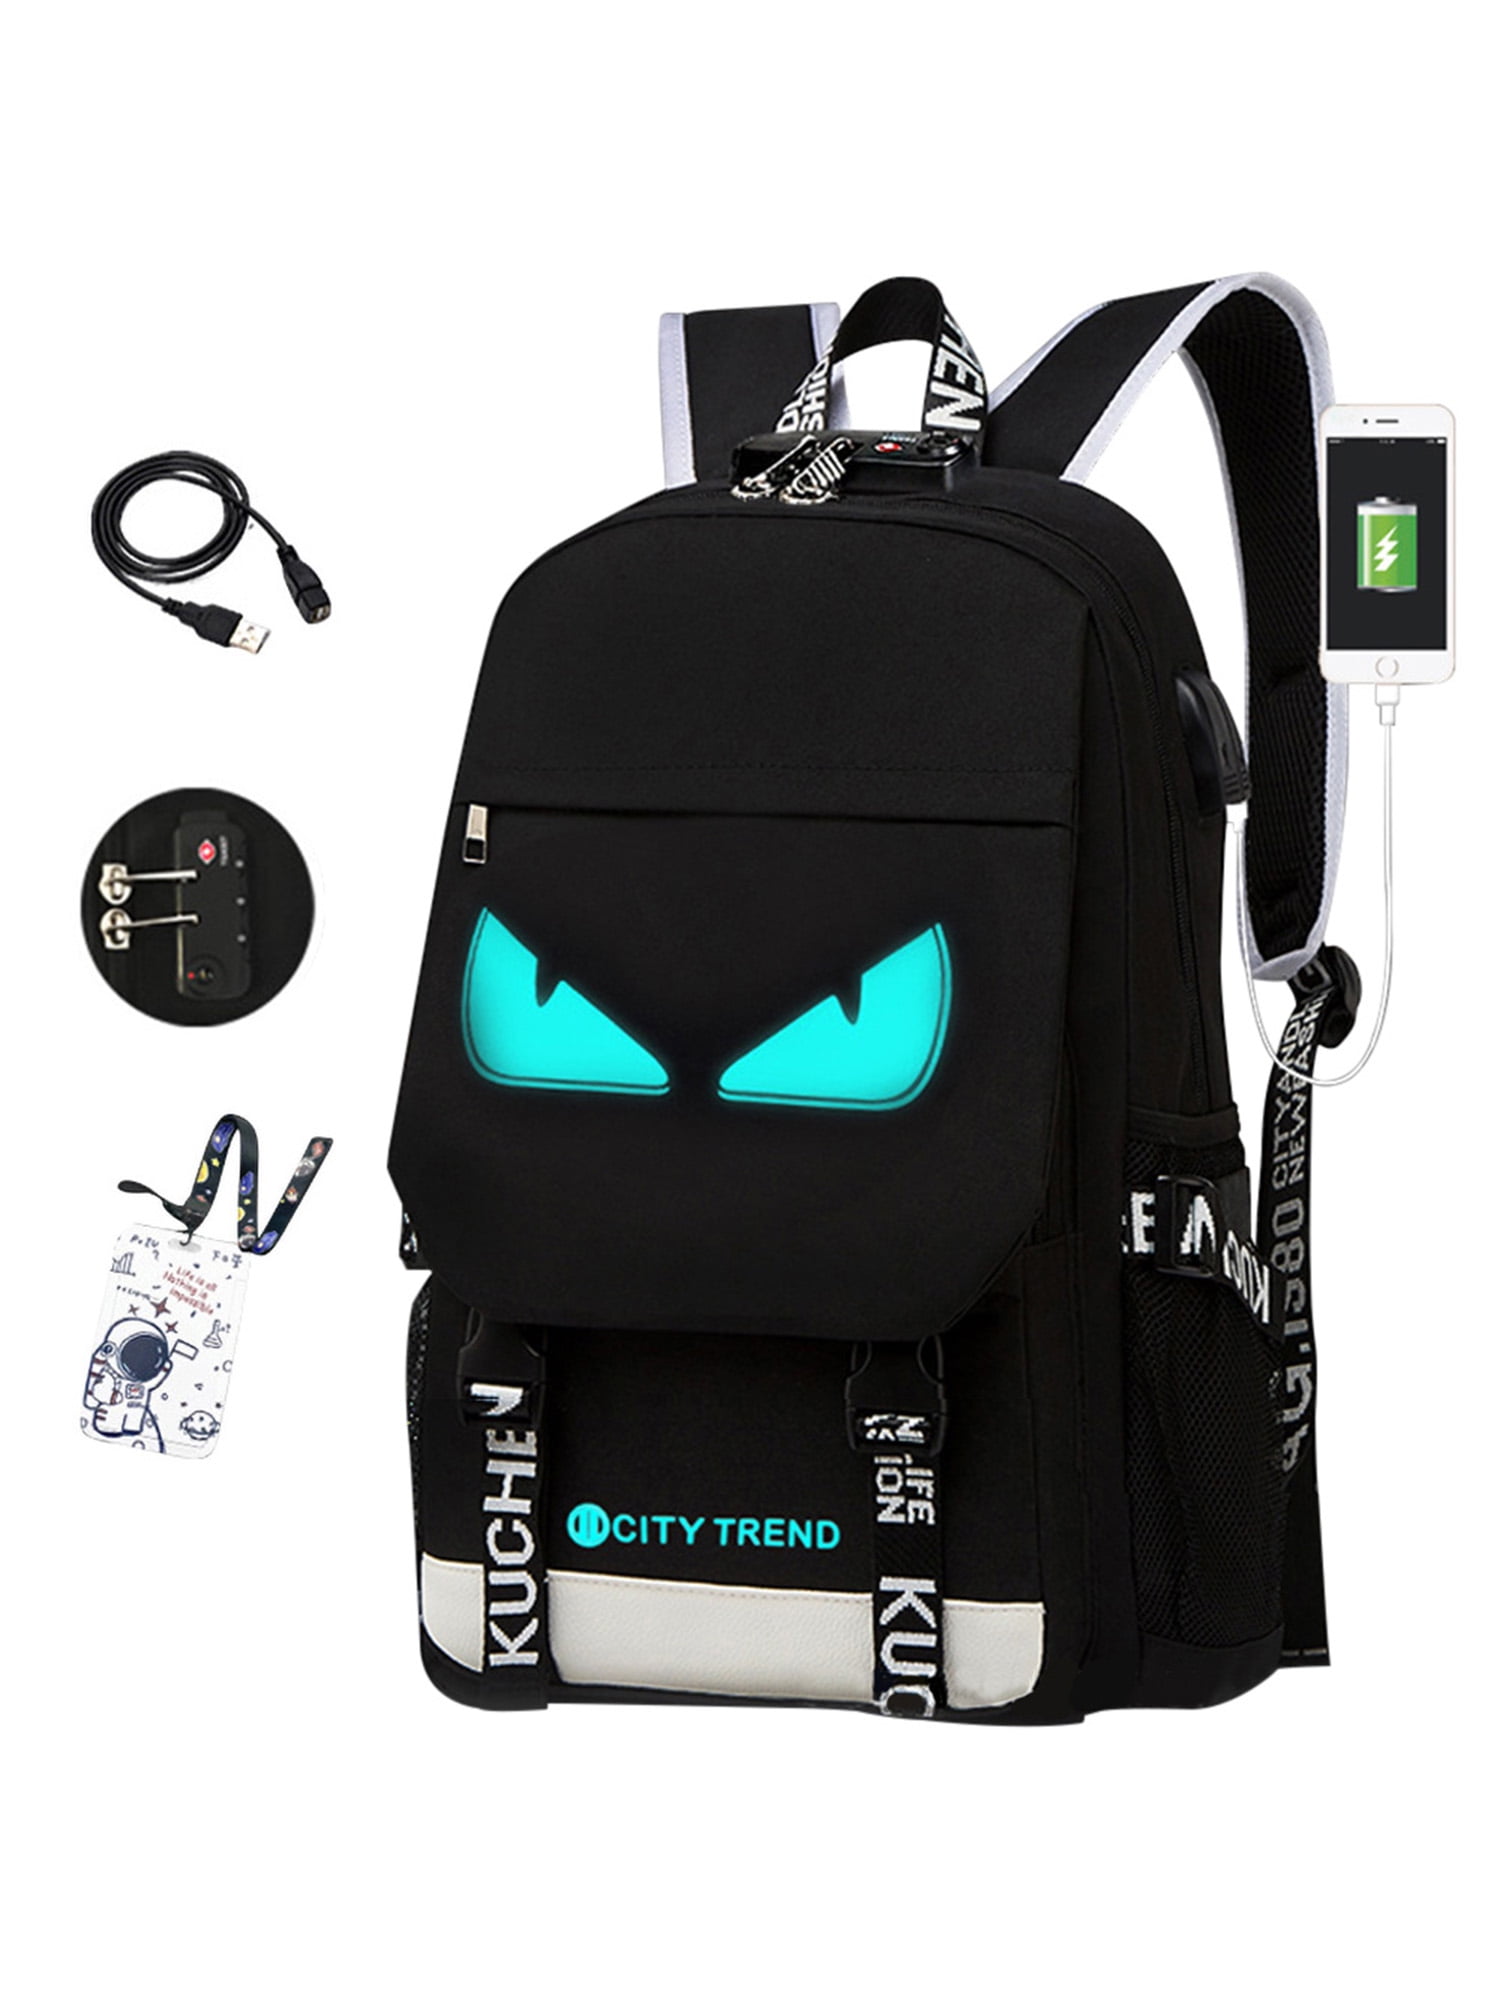 Student School Backpack 3D Luminous Animation USB Charge School bag for  Teenager boy anti-theft children's backpack schoolbags